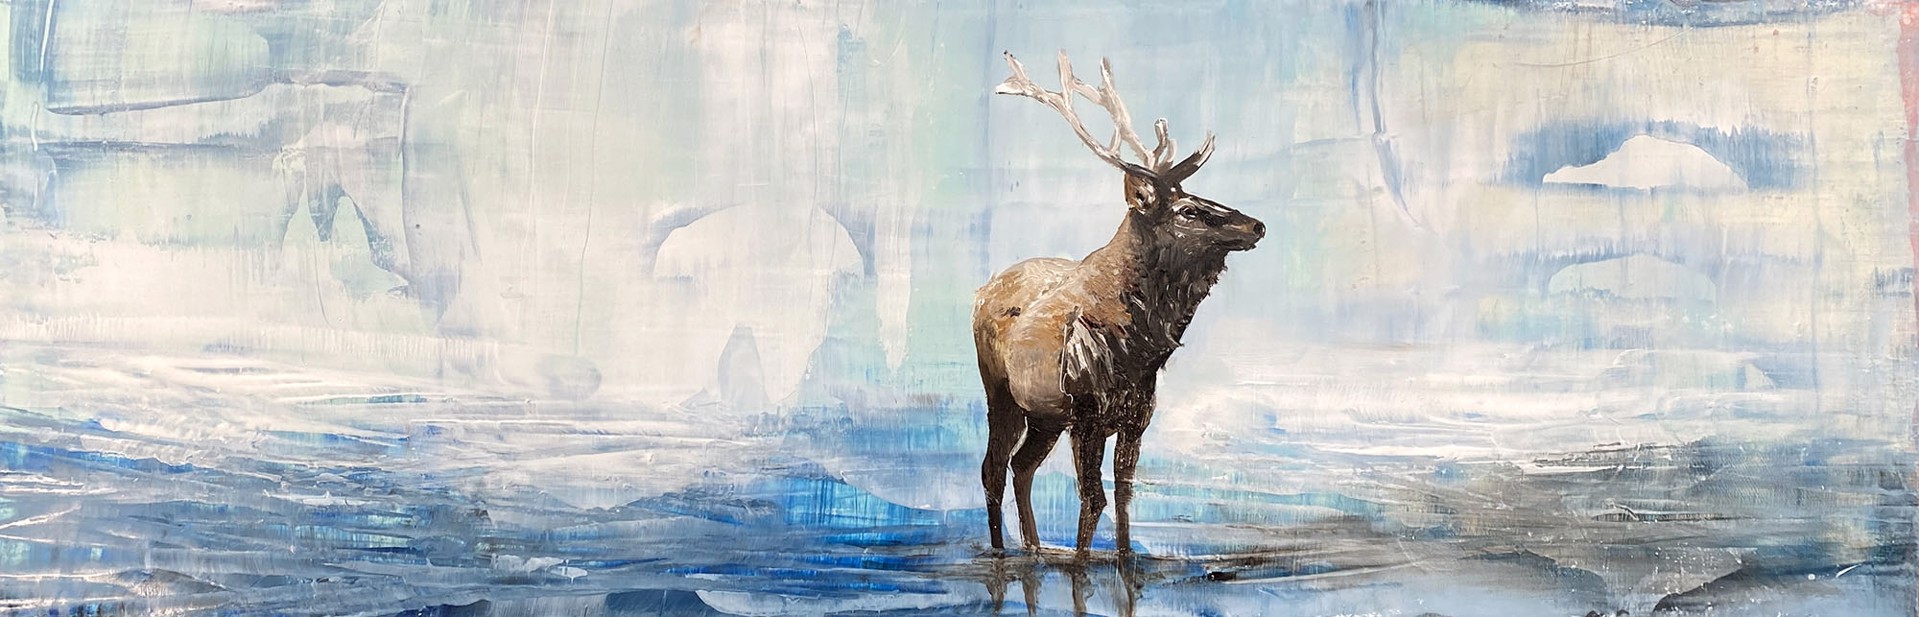 Original Oil Painting By Jenna Von Benedikt Featuring A Bull Elk Standing On Abstracted Landscape In Cool Blues